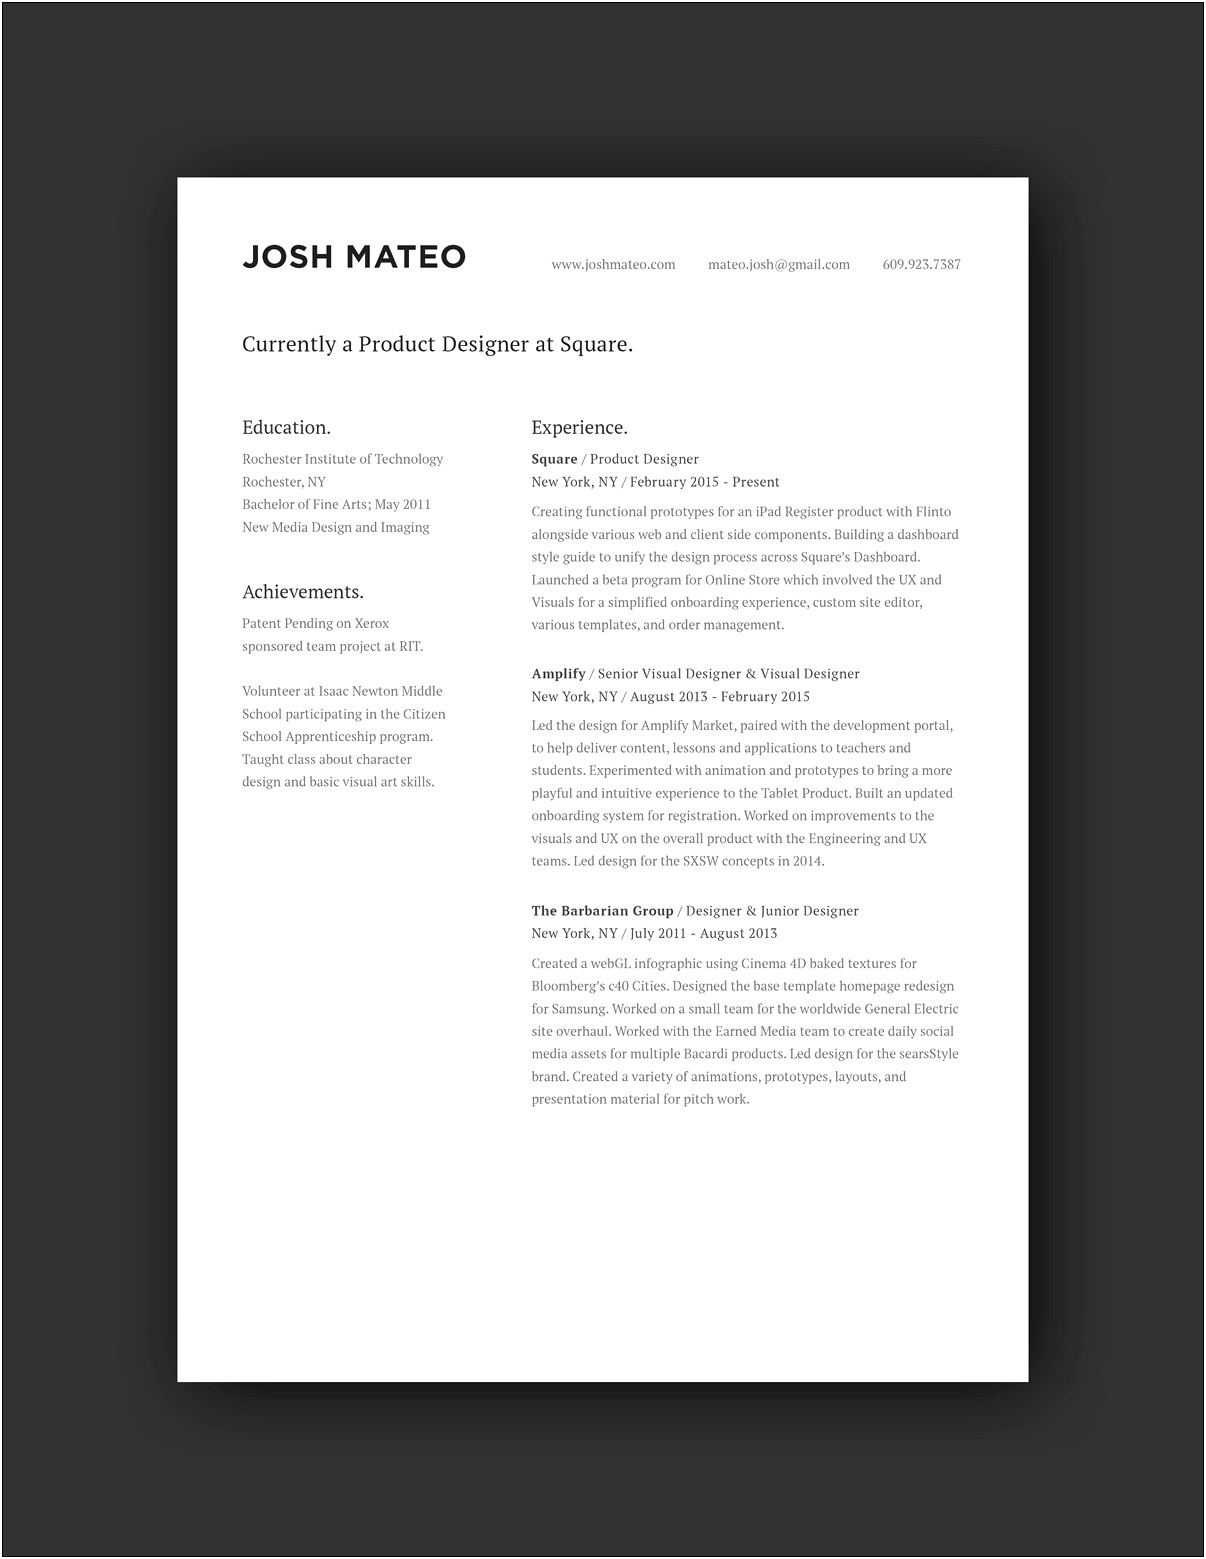 Putting Personal Design Projects On Resume